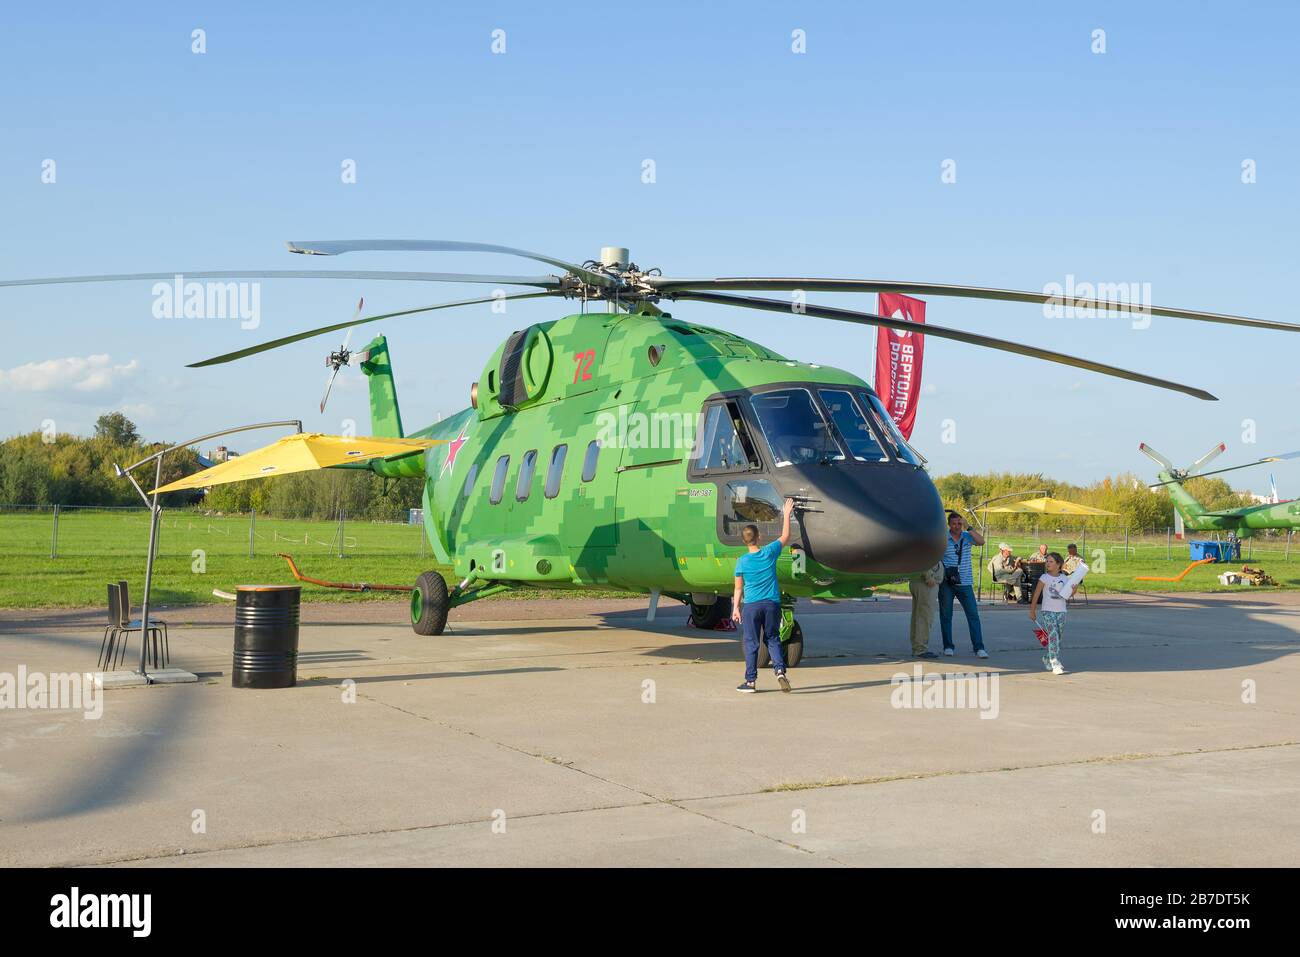 ZHUKOVSKY, RUSSIA - AUGUST 30, 2019: Heavy transport twin-engine Russian helicopter Mi-38T on the air show MAKS-2019 Stock Photo